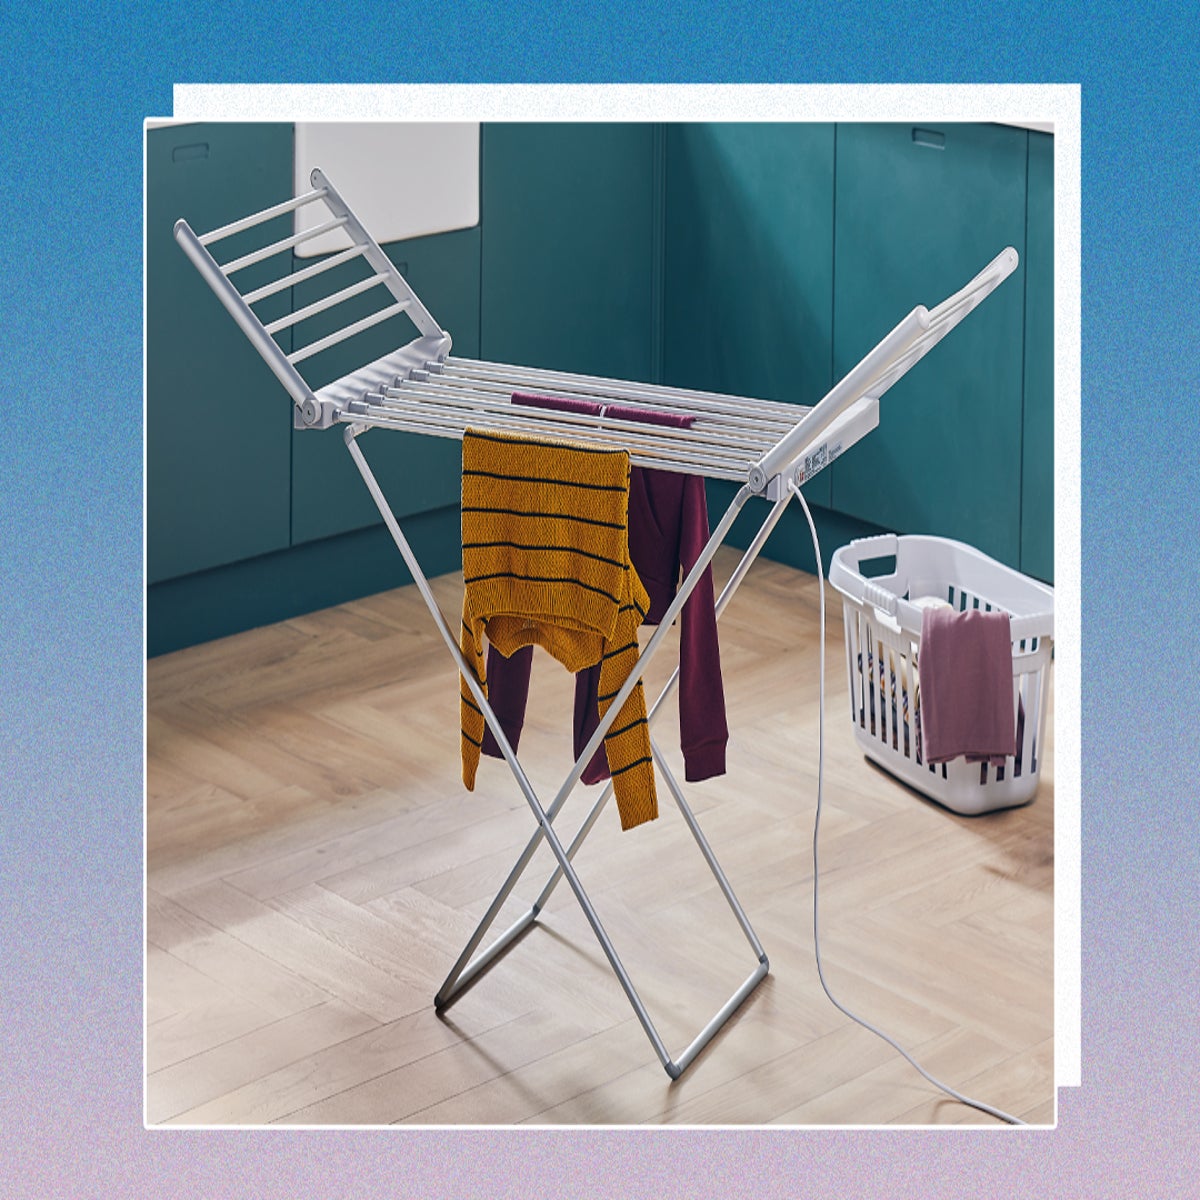 18 Bars Heated Clothes Airer, Indoor Electric Heated Drying Rack with  Foldable Wings, Low Energy Electric Clothes Airer Dry for Home, Laundry